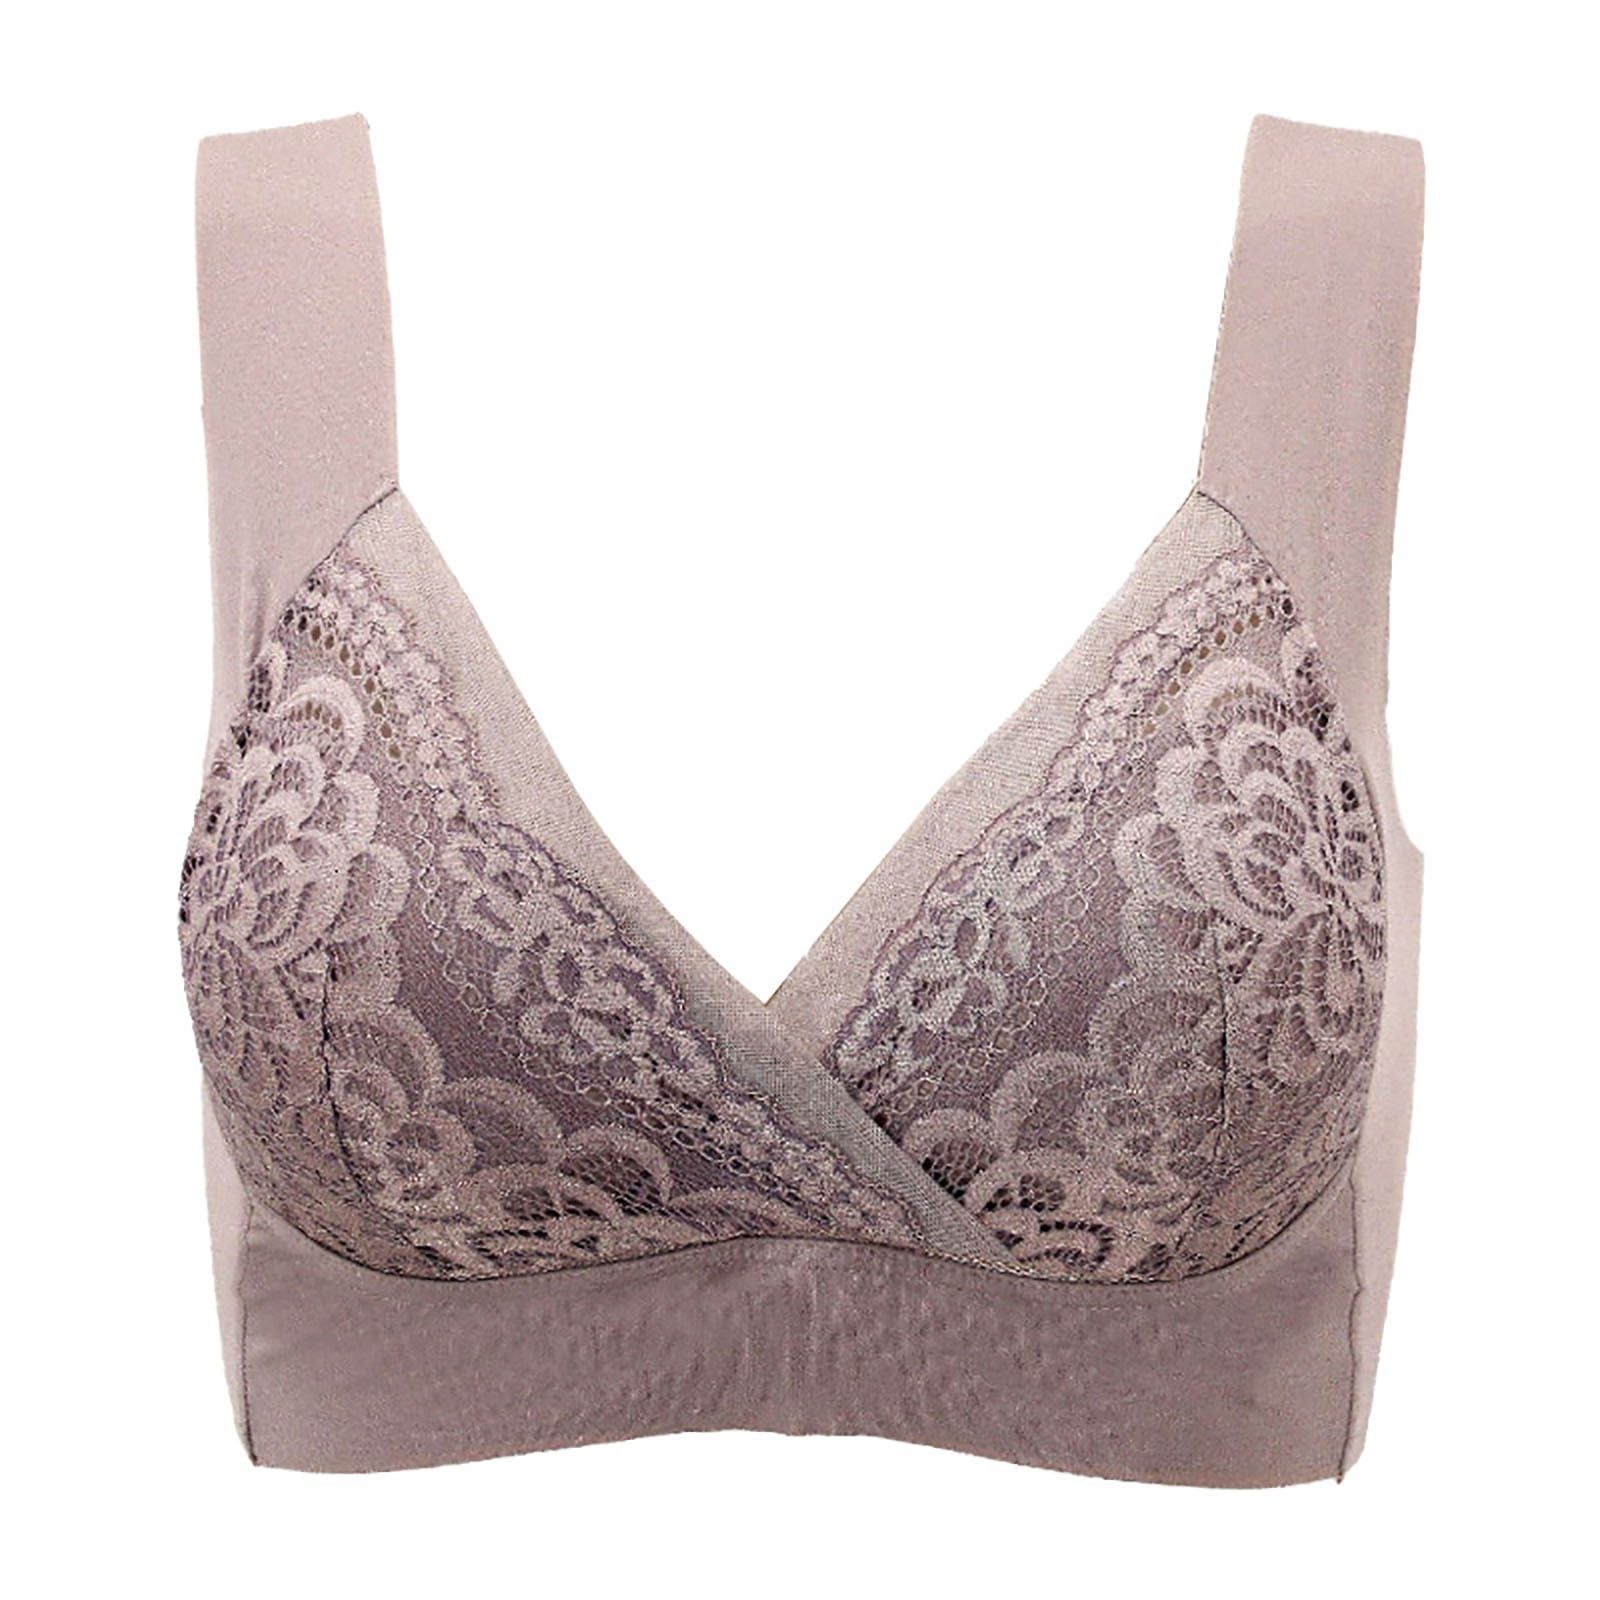 Kddylitq Mastectomy Bras With Built In Breast Forms Padded